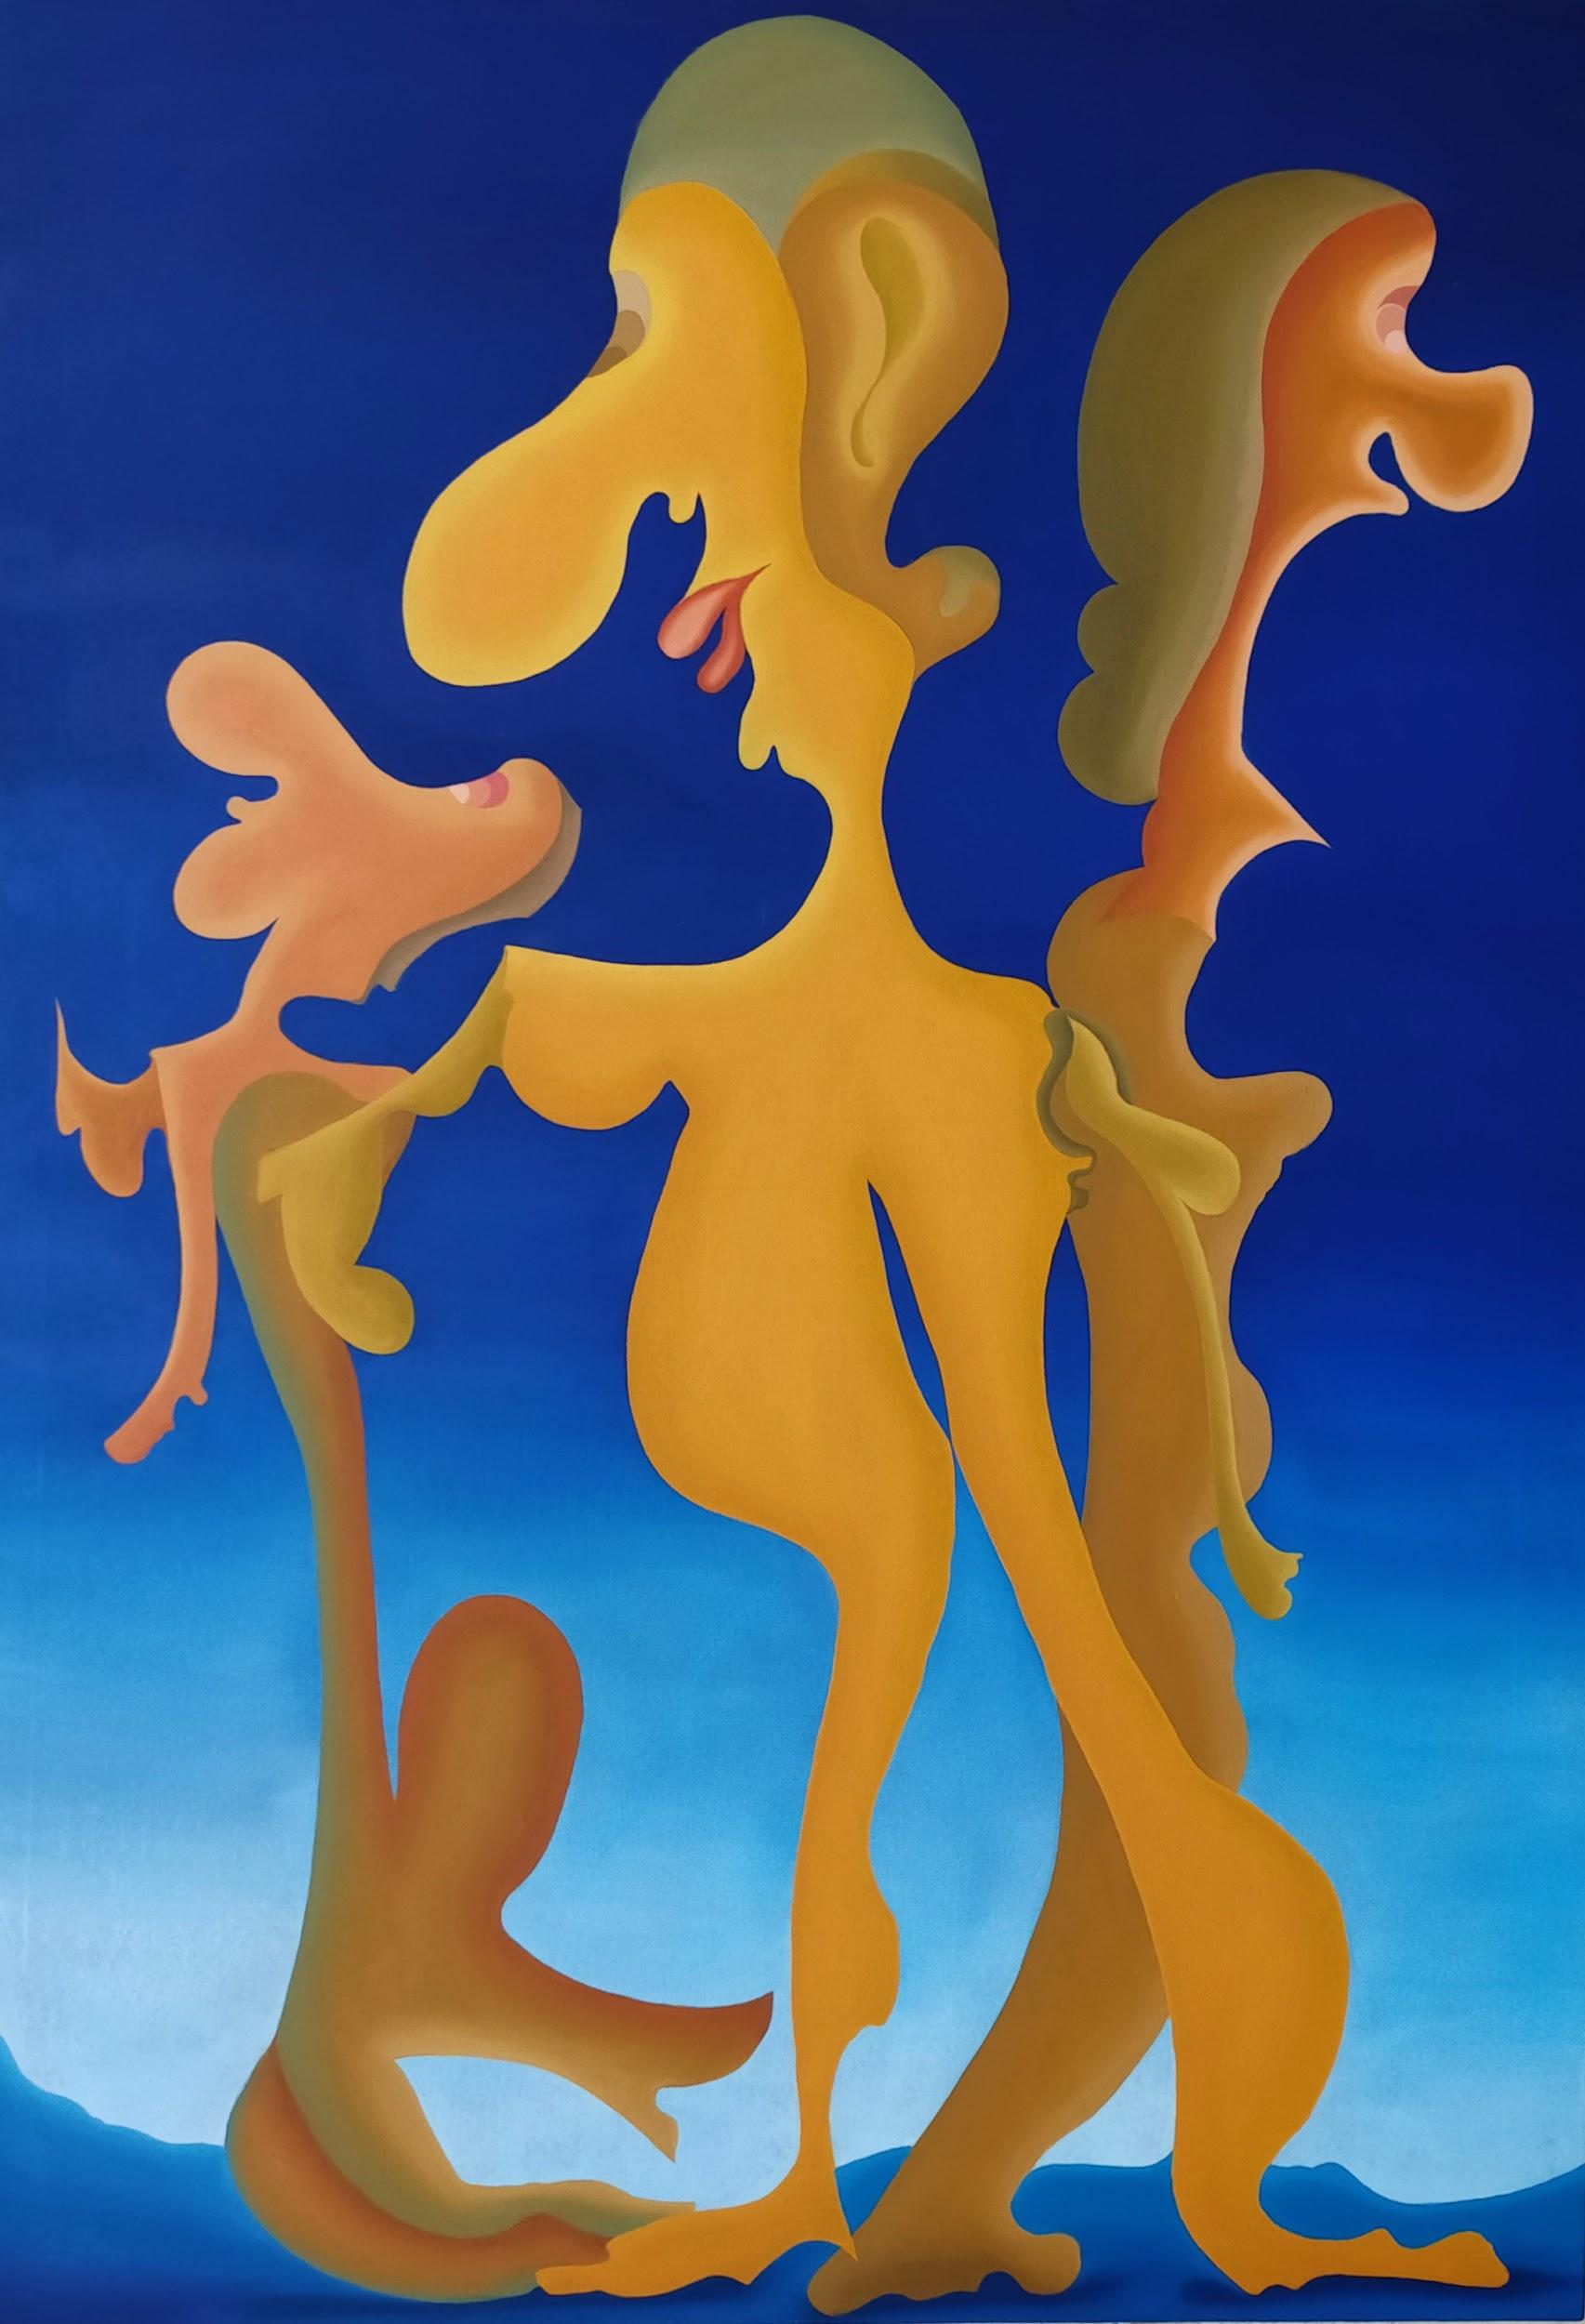 Dynasty<br>Medium: Oil on canvas <br> Size: 36 × 60 inches